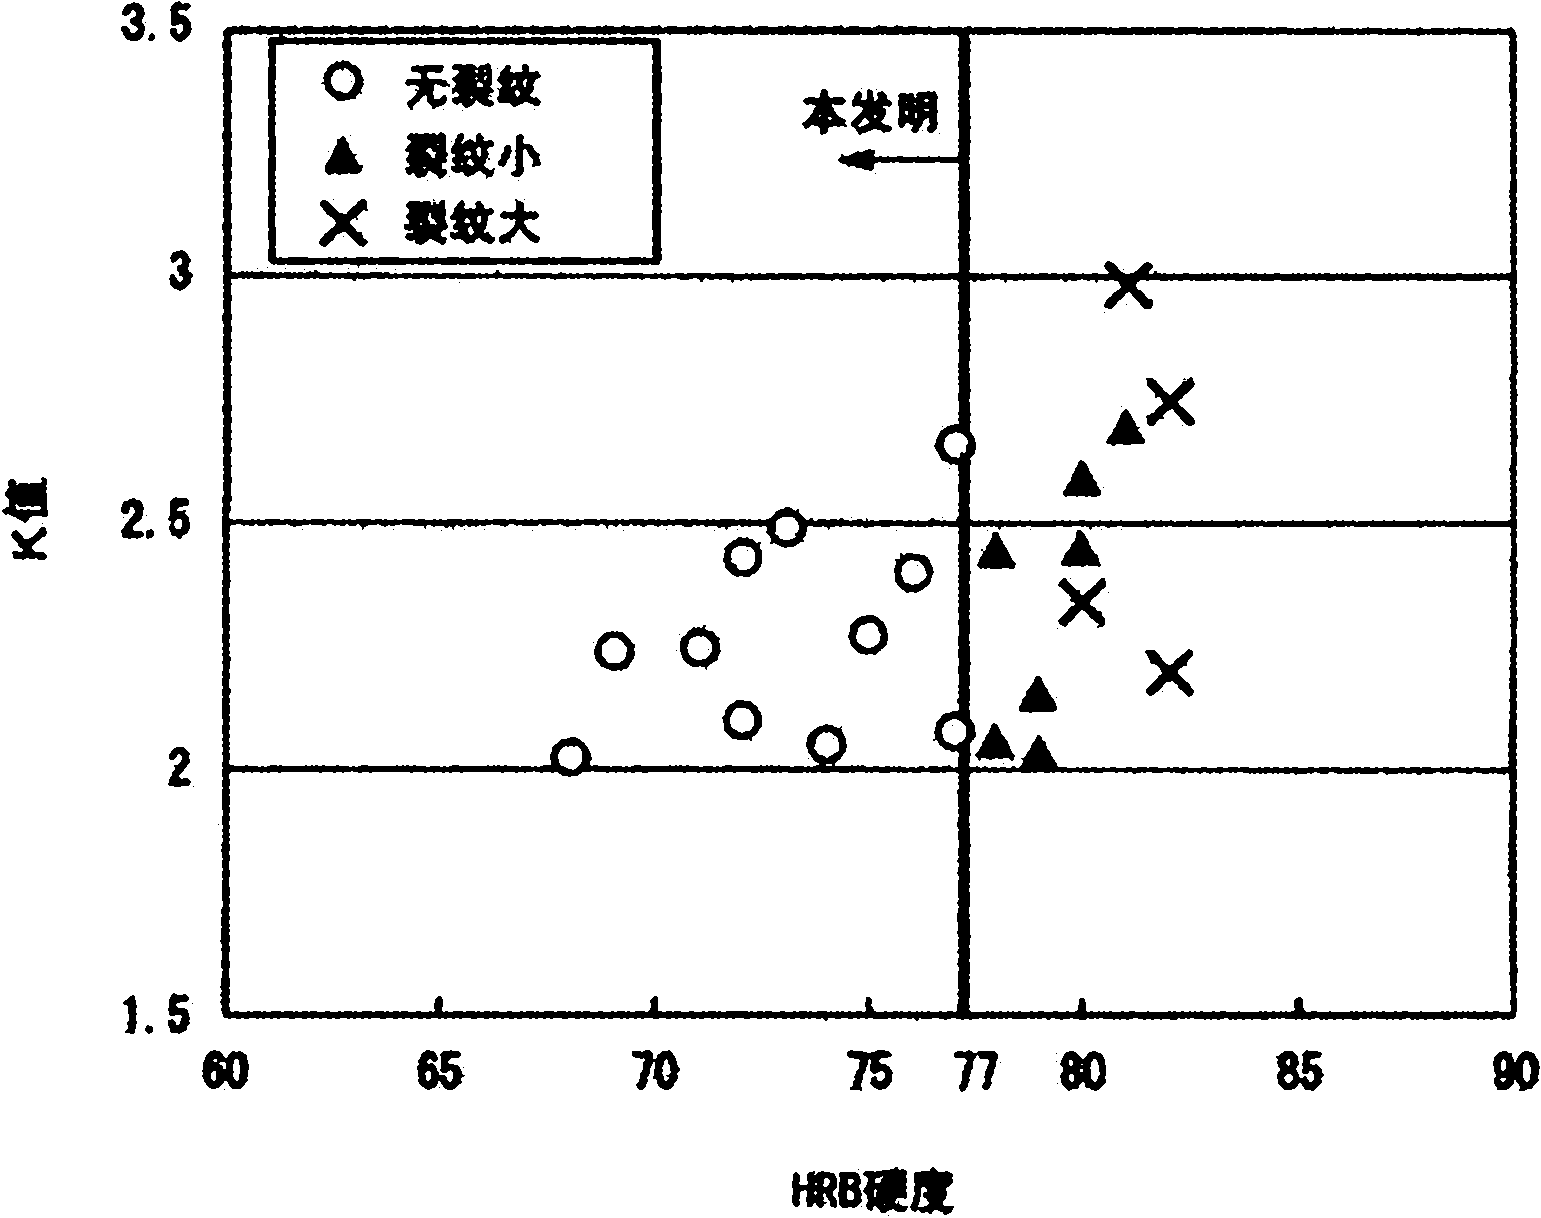 Carbon steel sheet having excellent carburization properties, and method for producing same